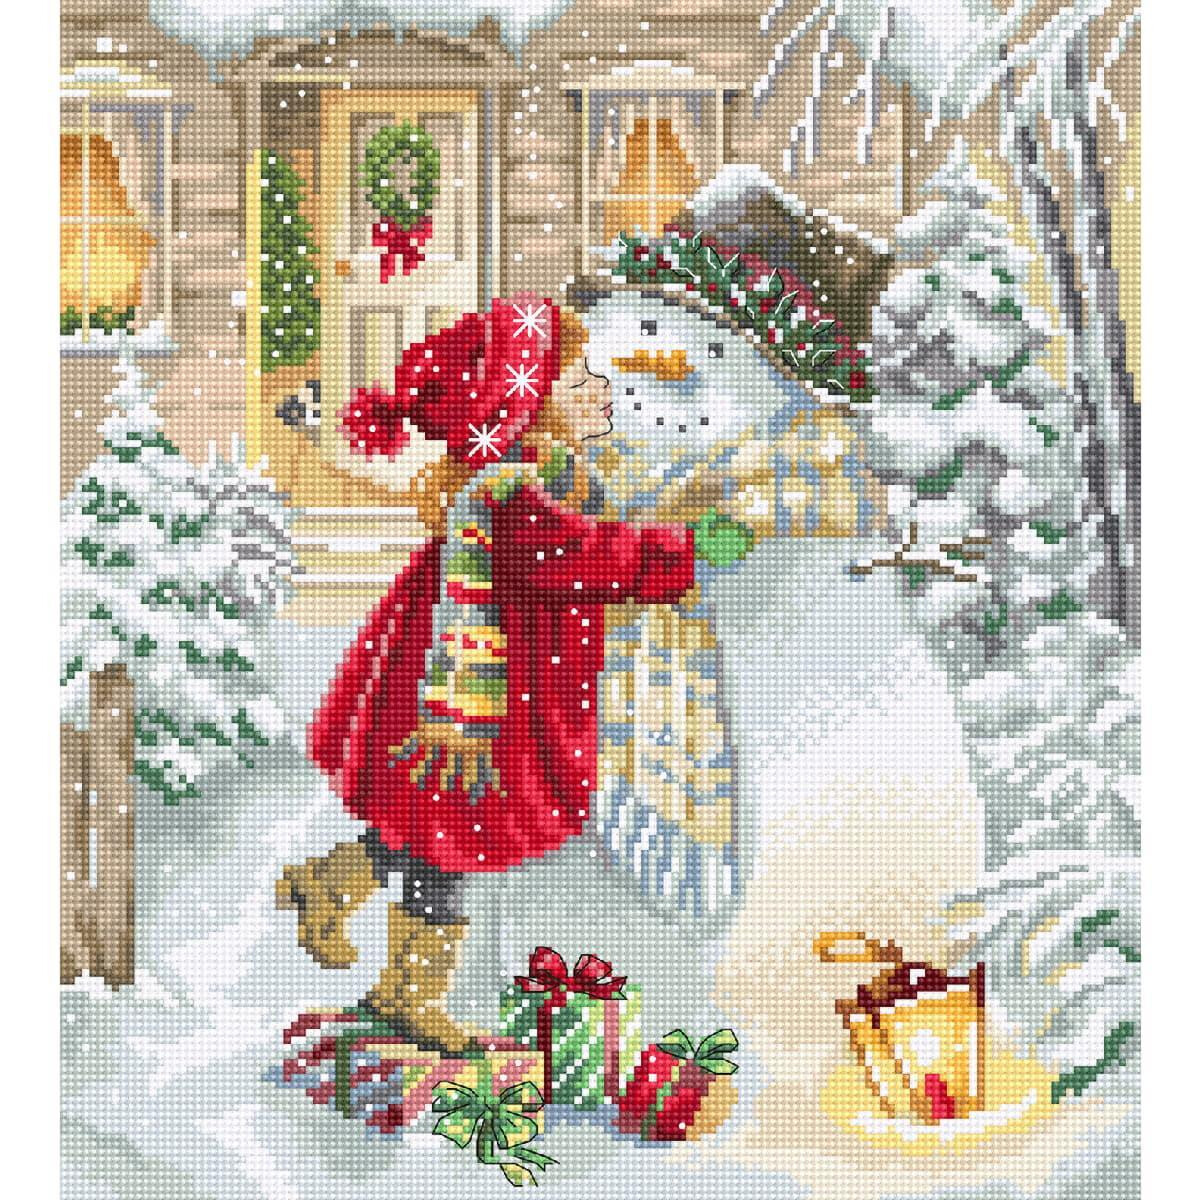 A snowy scene shows a child in a red coat and hat...